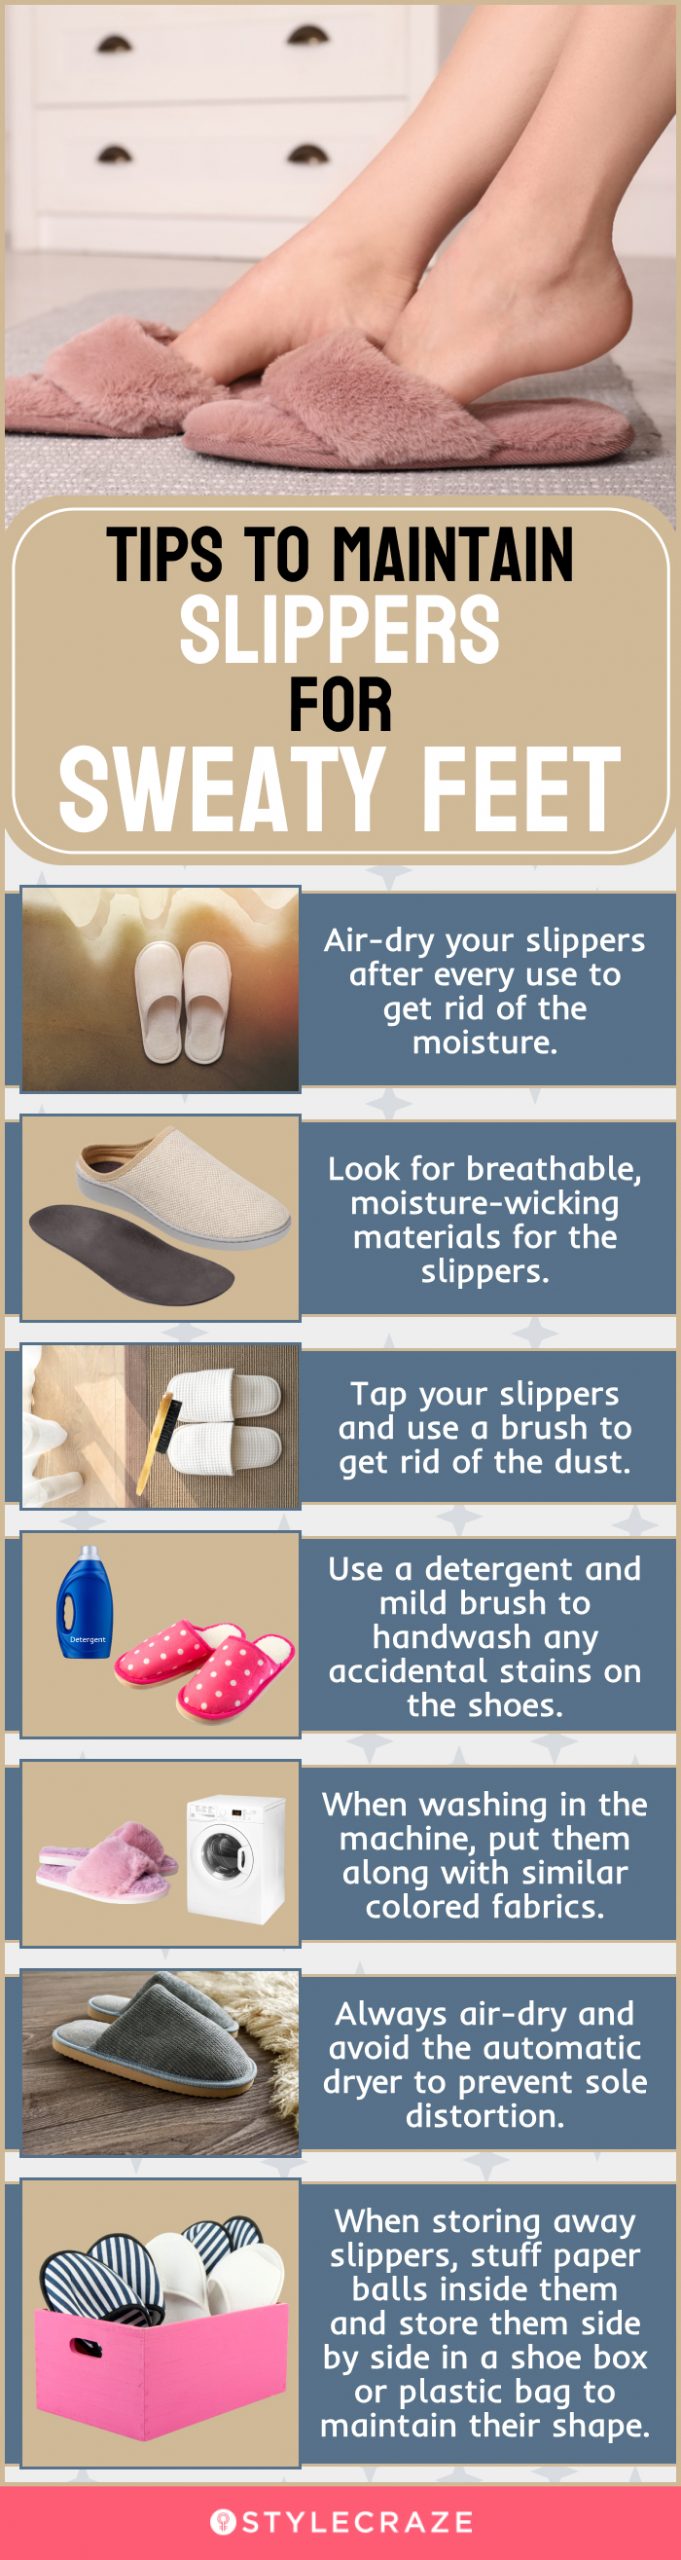 Tips To Maintain Slippers For Sweaty Feet